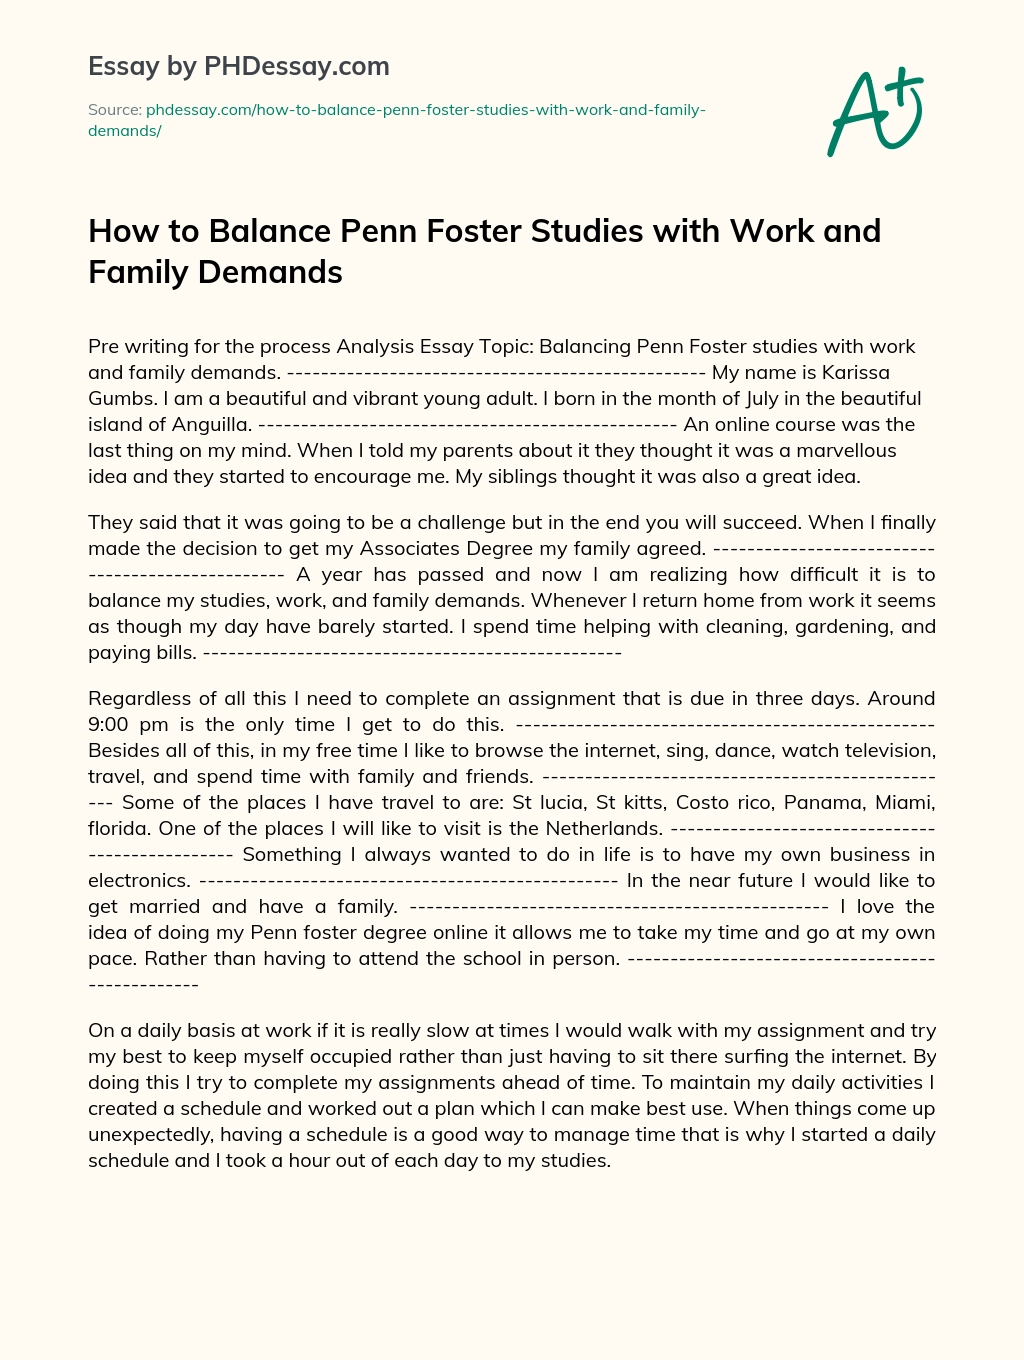 How to Balance Penn Foster Studies with Work and Family Demands essay